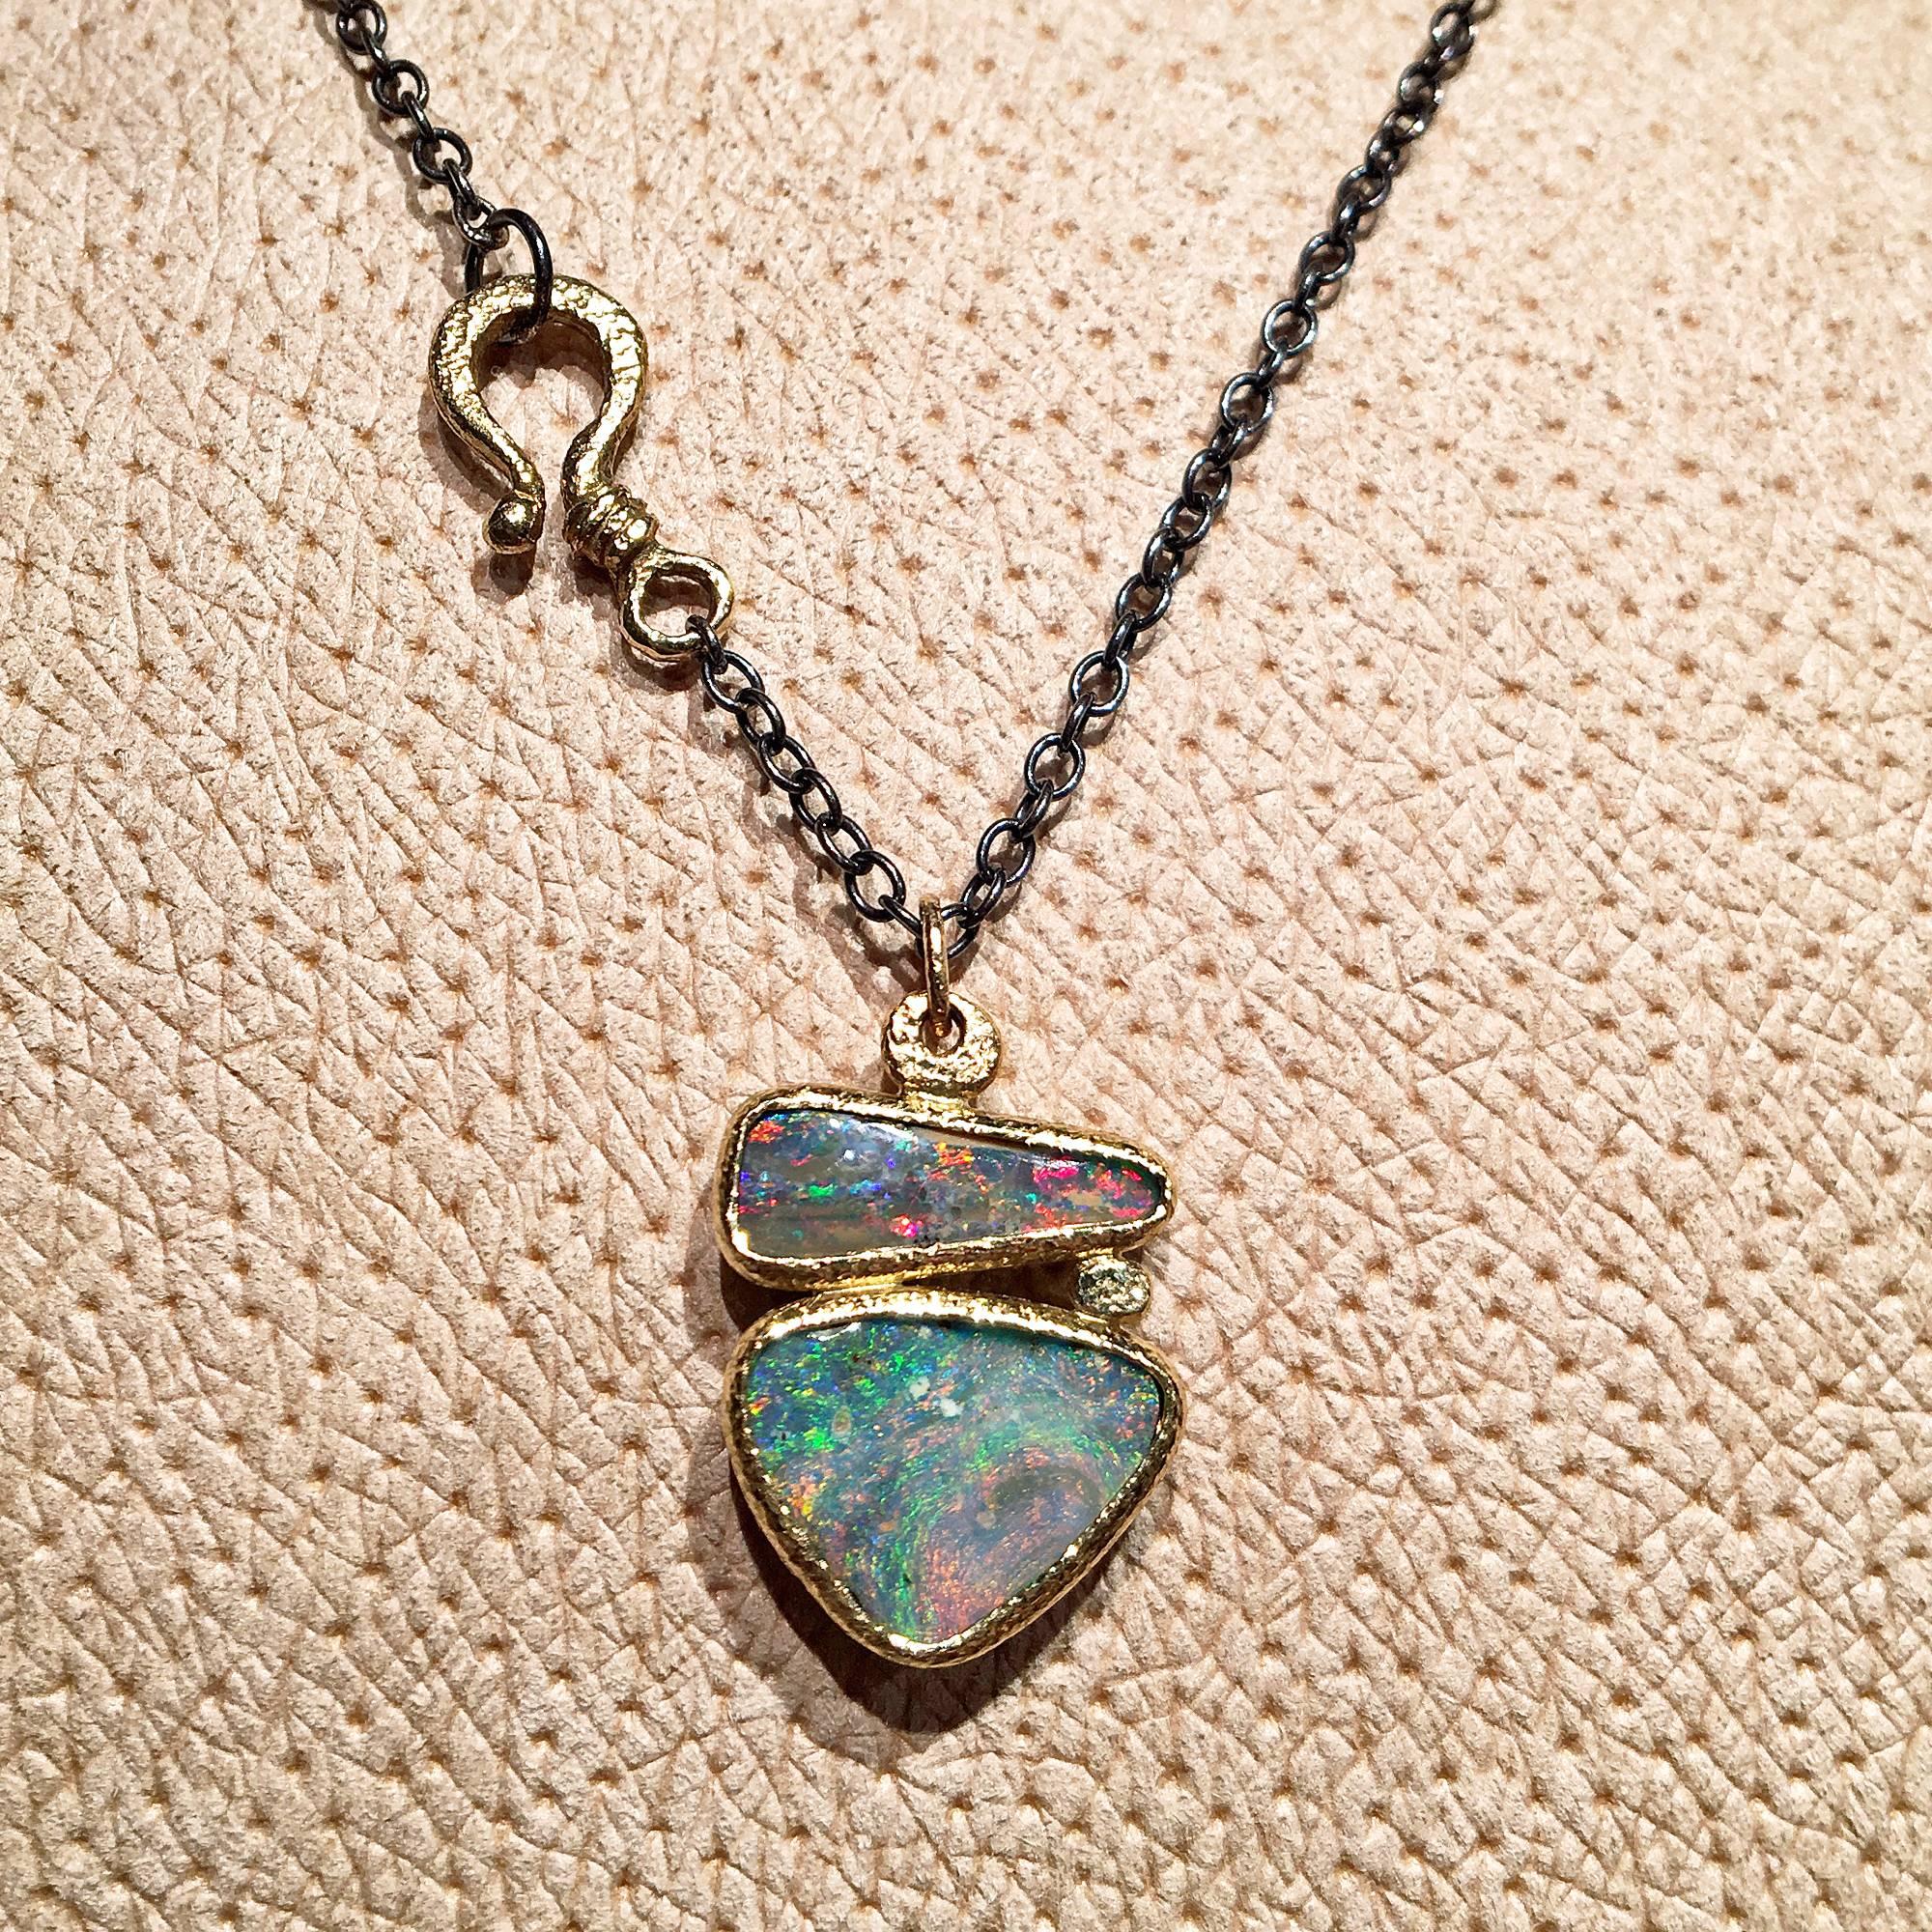 One of a Kind Necklace handcrafted by jewelry artist Rona Fisher featuring two gorgeous Australian boulder opals with magnificent color, bezel-set in beautifully-textured 18k yellow gold on an oxidized sterling silver link chain (16 inches + 1 inch